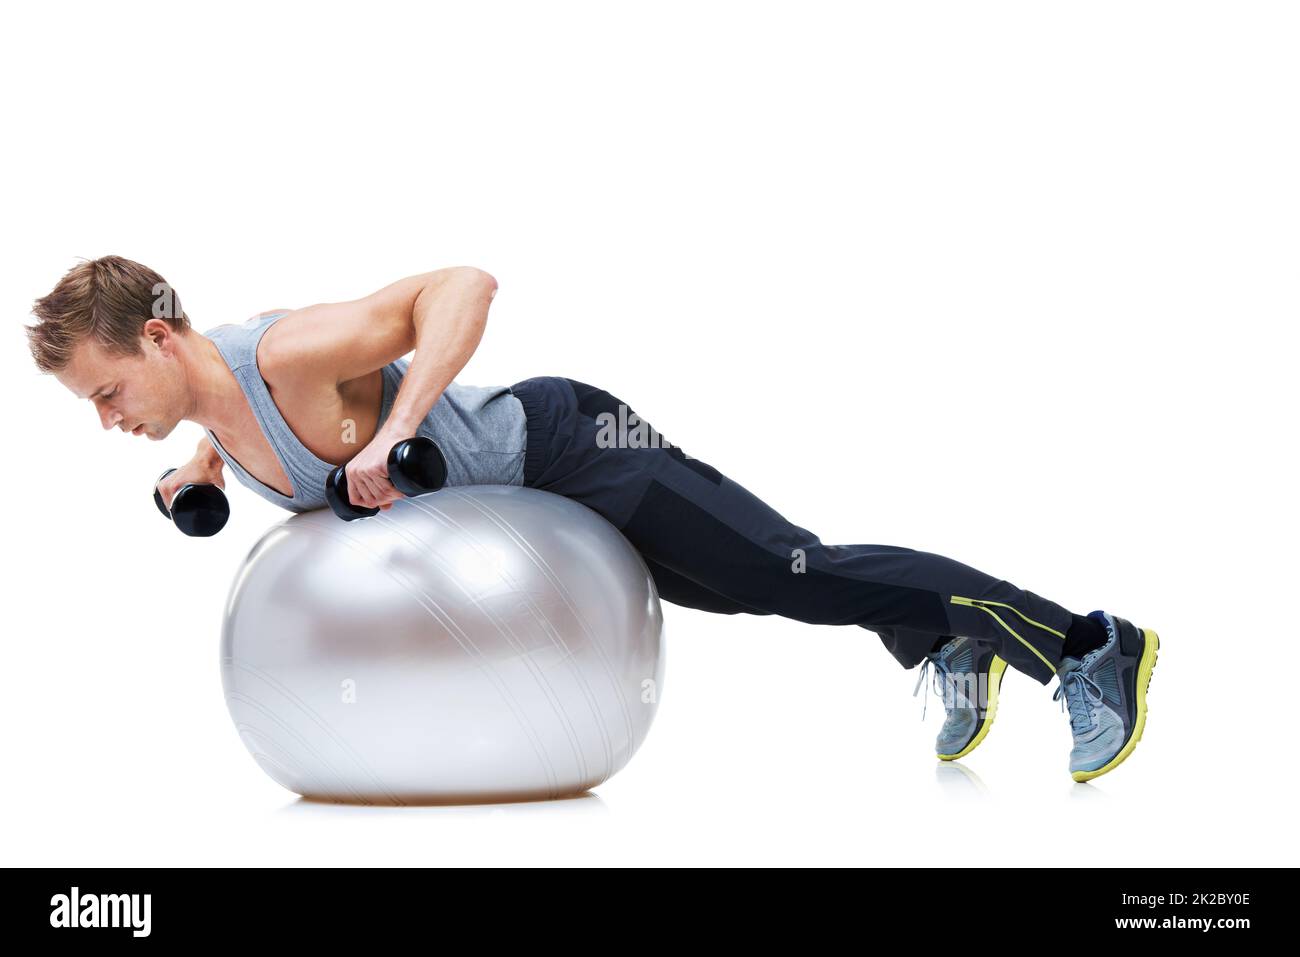 Really working those arms. Shot of a man balancing on an exercise ball lifting weights. Stock Photo